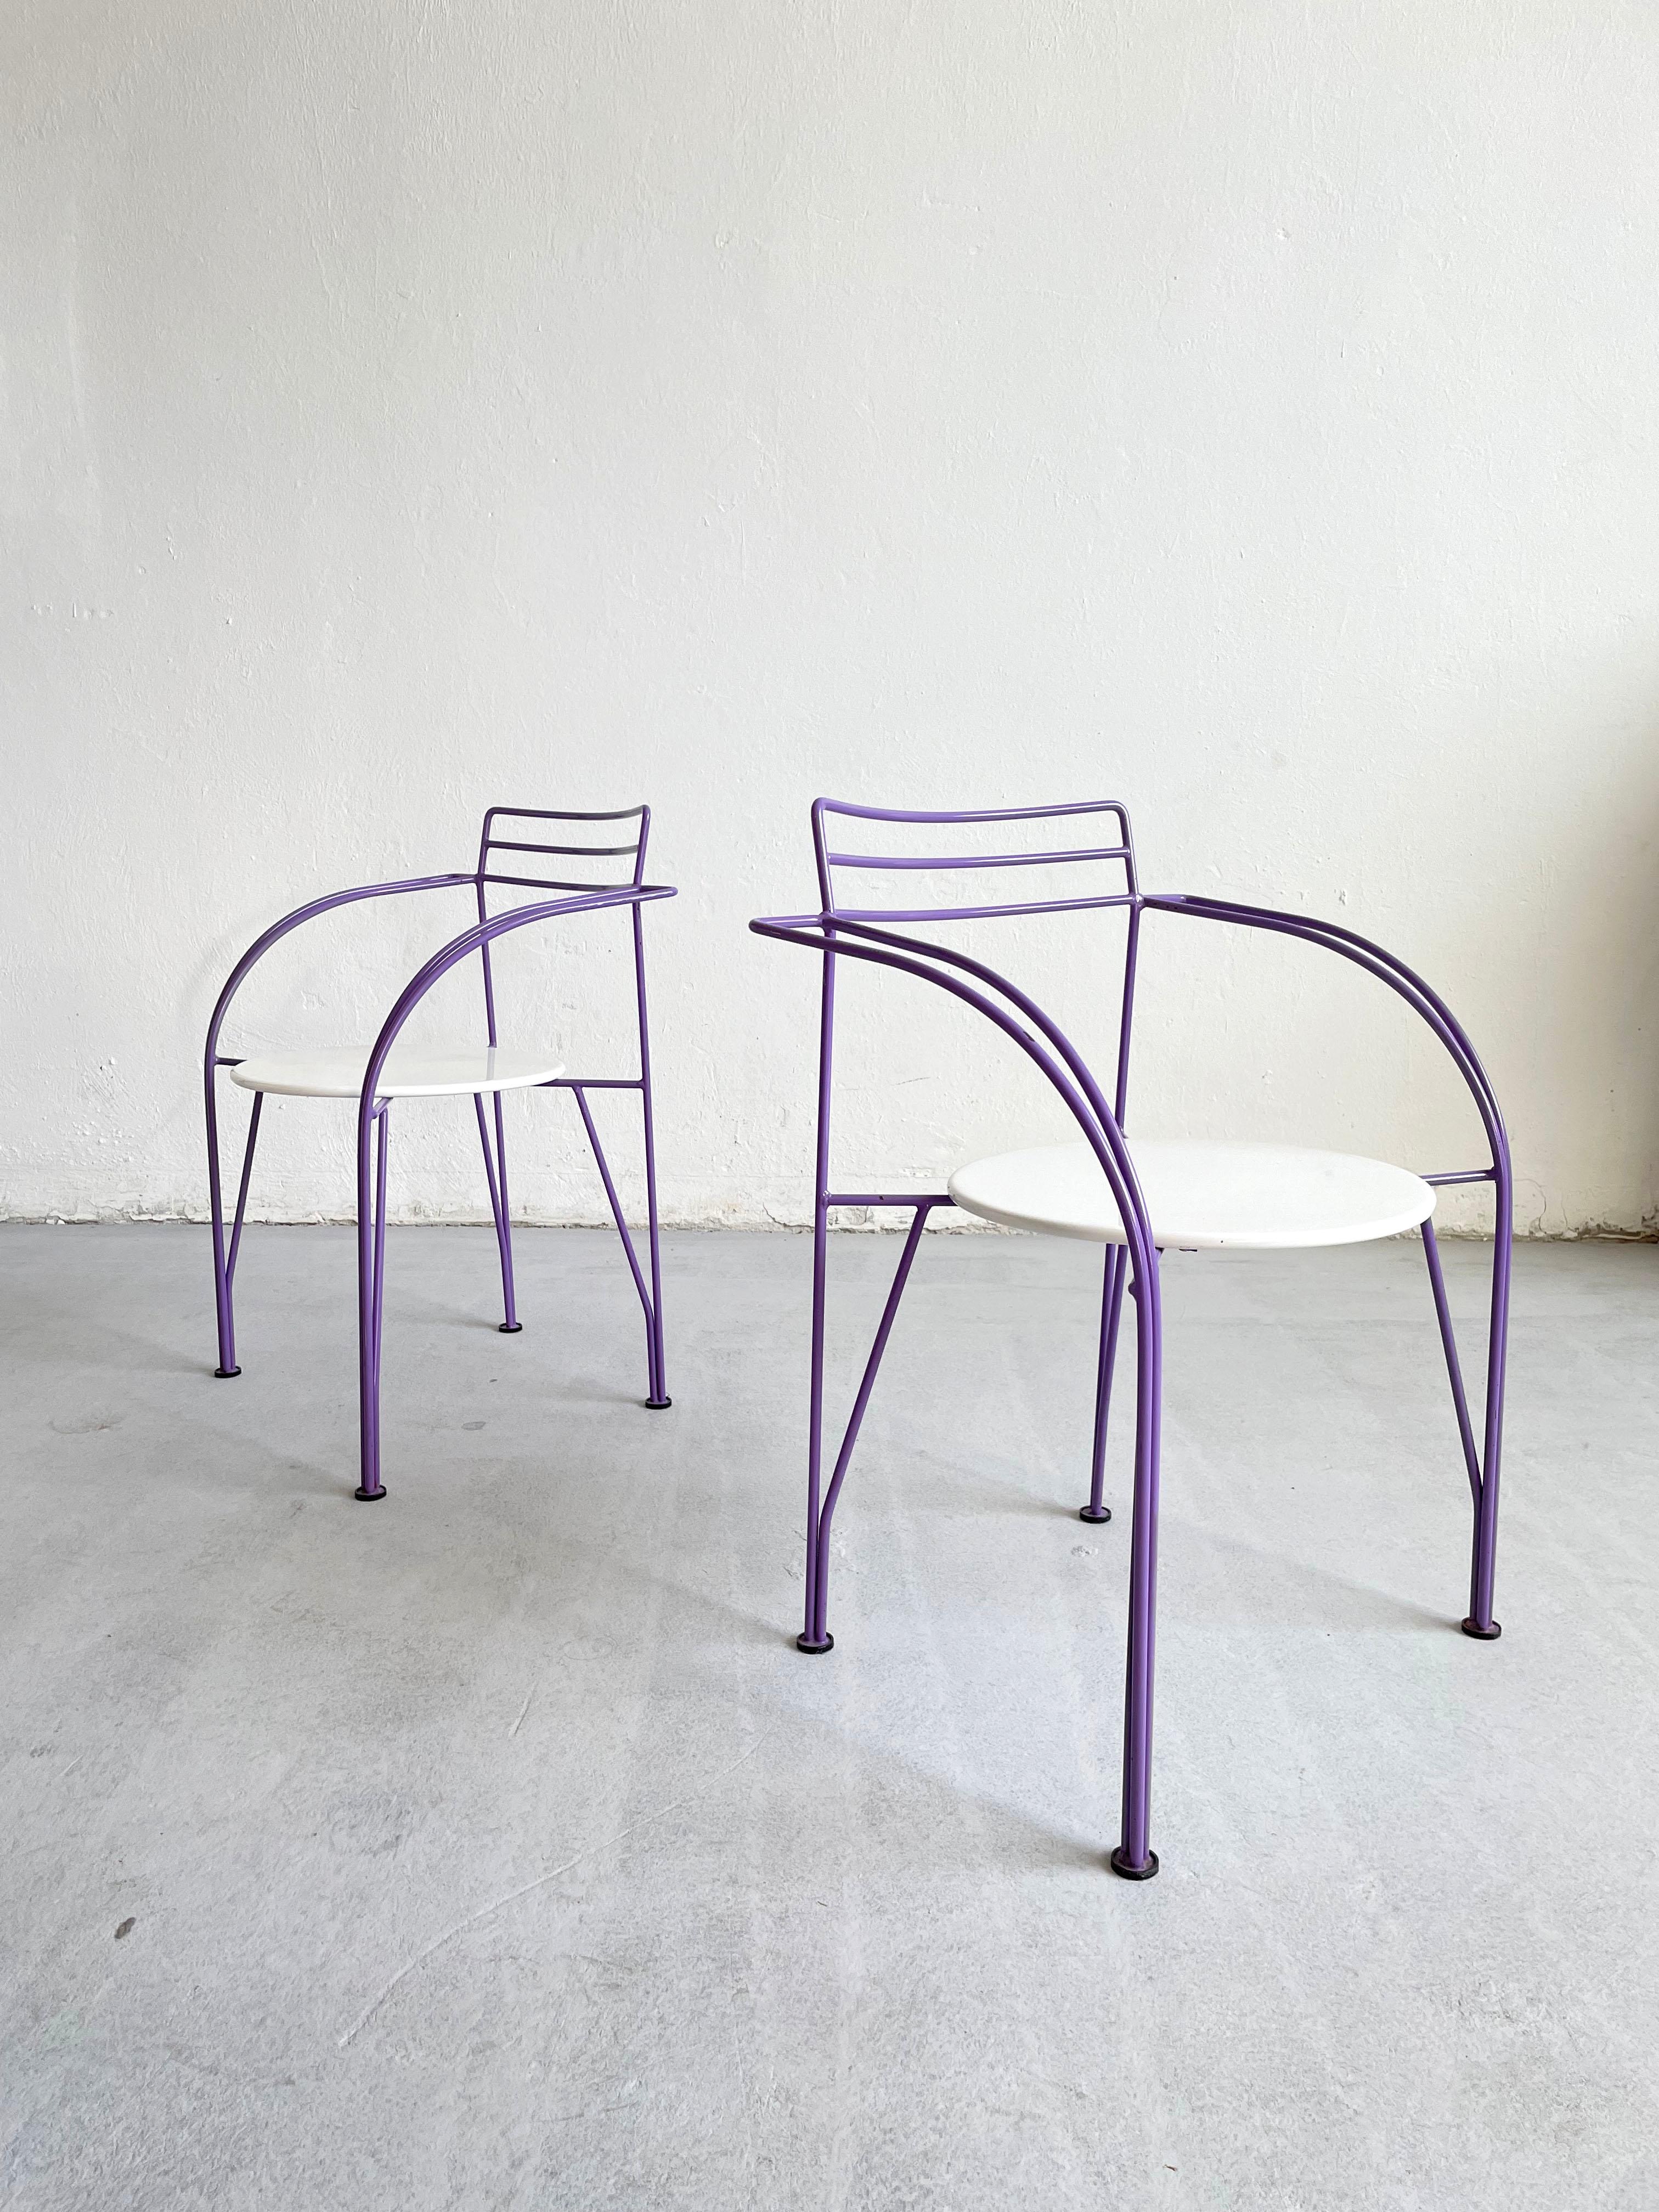 Set of 2 vintage postmodern chairs 'Lune d'Argent' (Silver Moon) by the French designer Pascal Mourgue

The sturdy minimalist steel structure of the chairs is powder-coated in white and lilac colors. 

The chair 'Lune d'Argent' was designed in